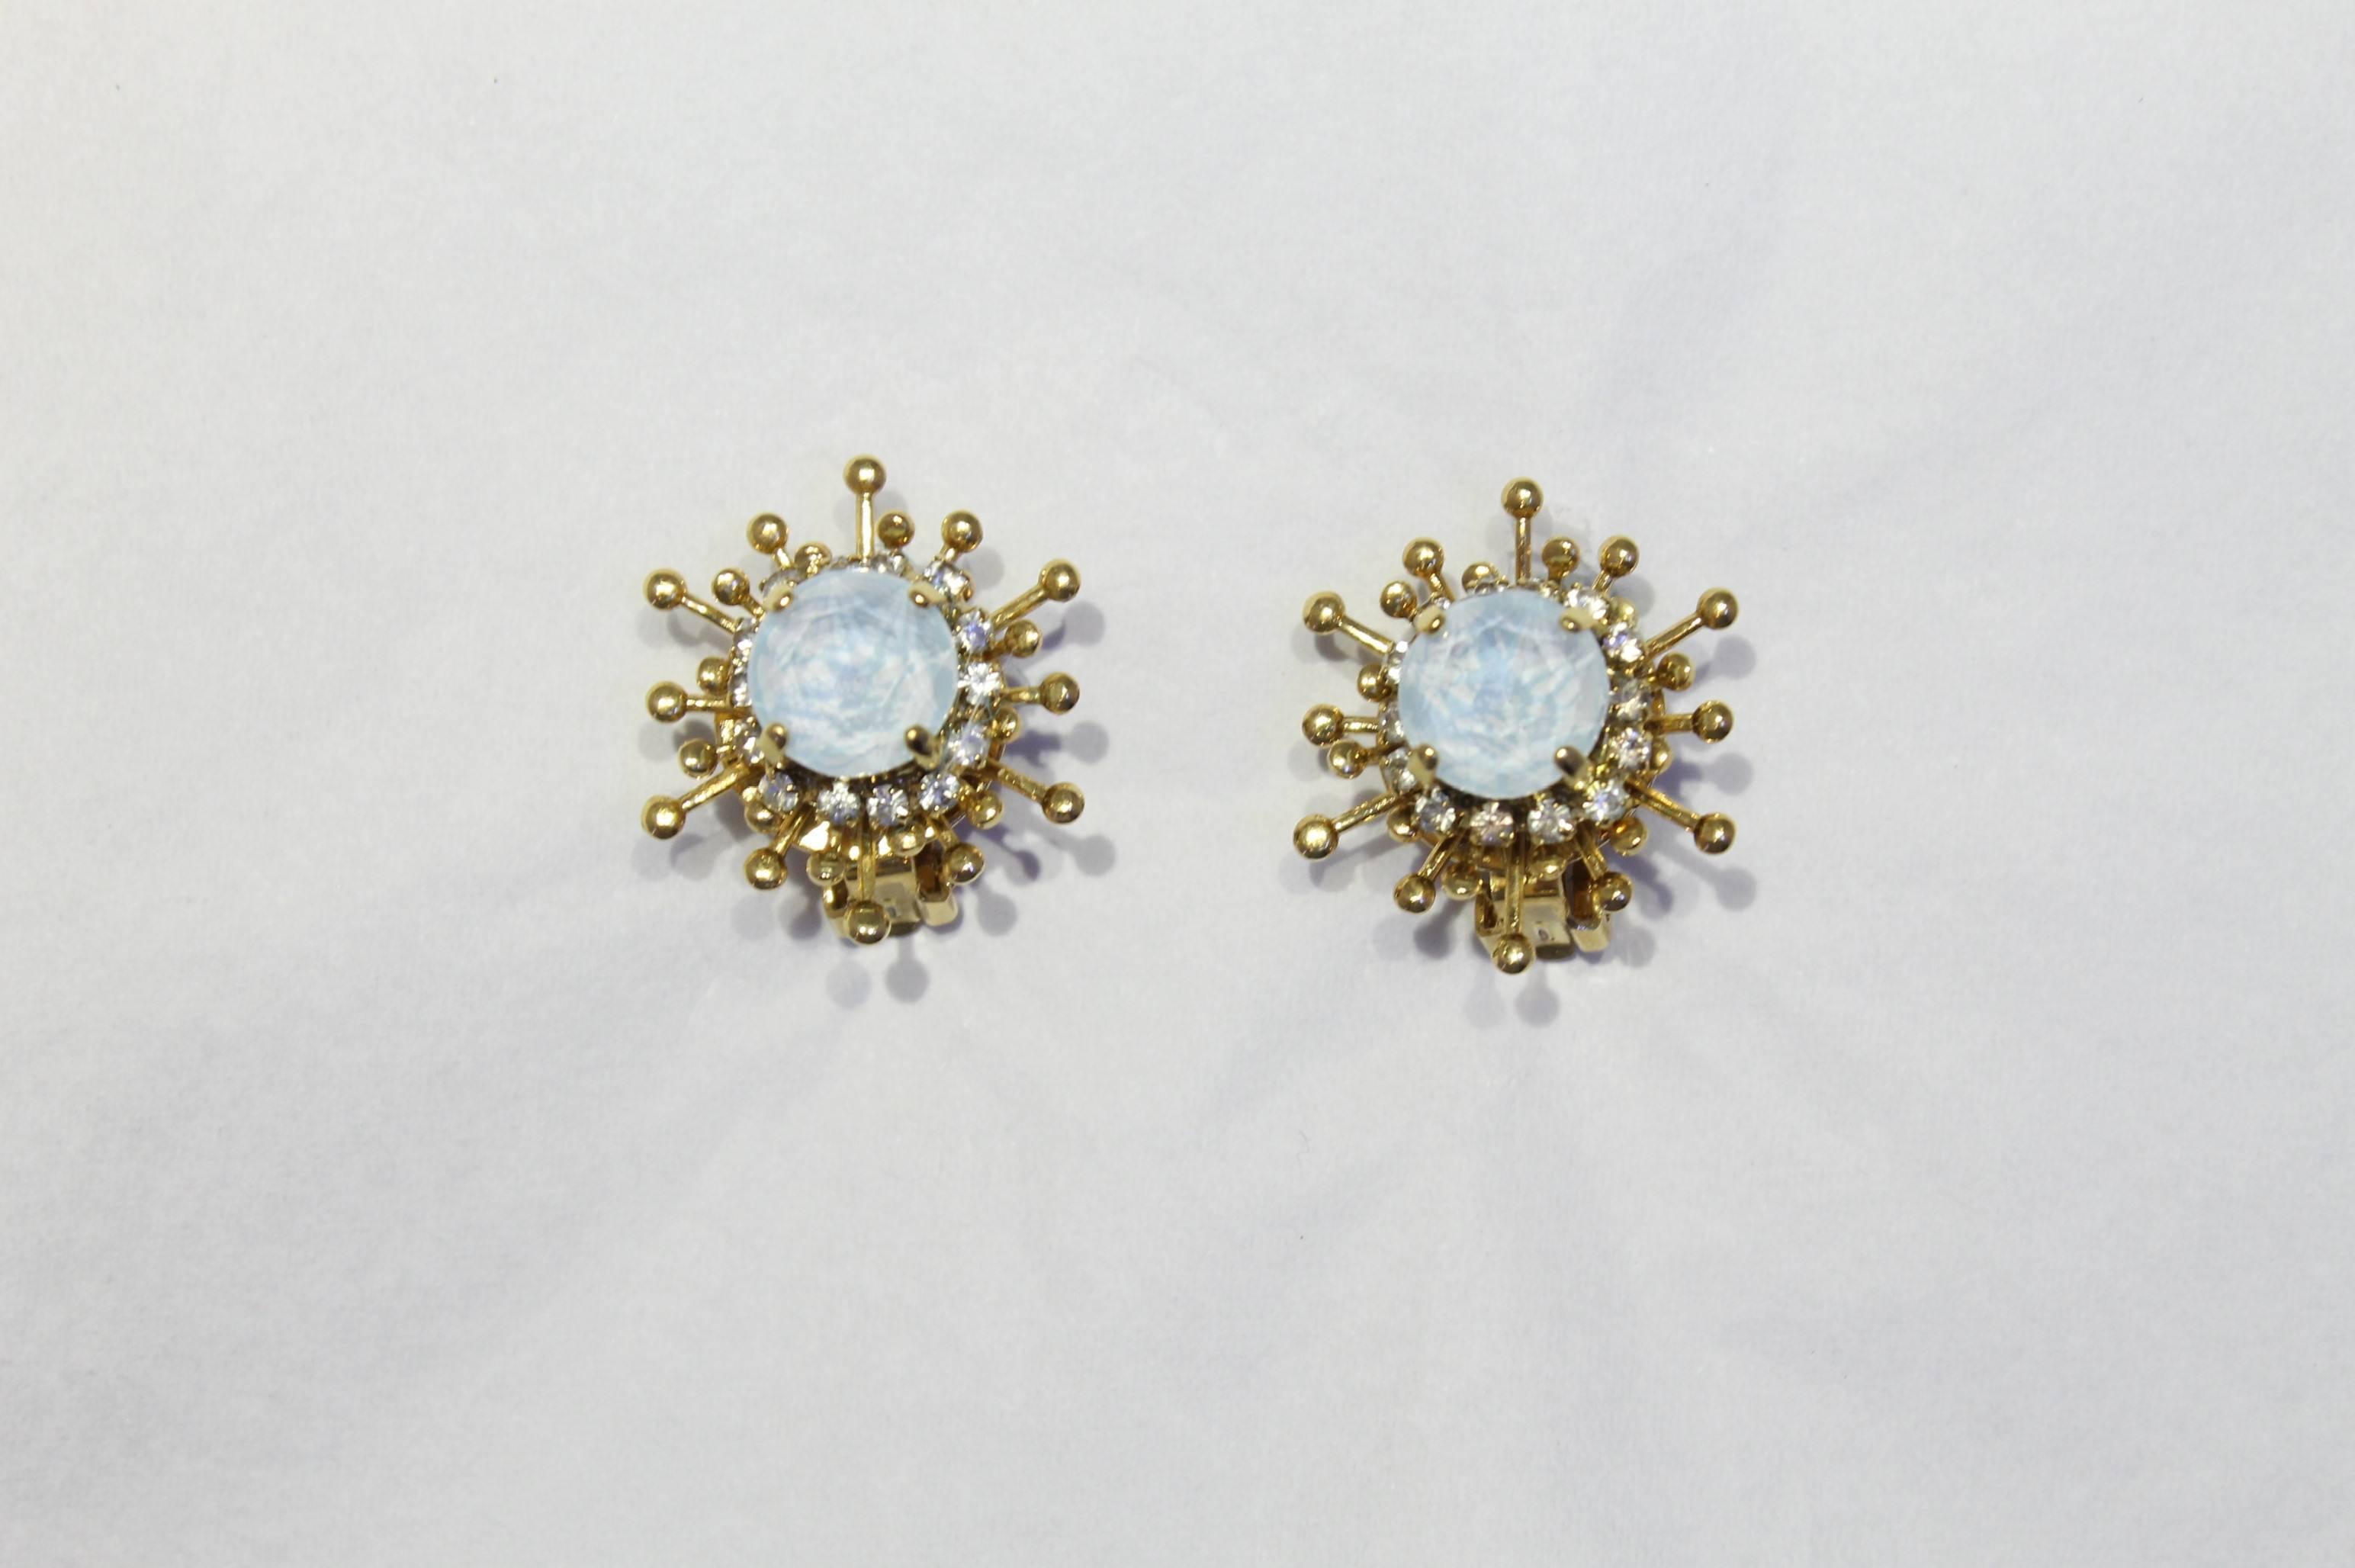 Stunning and ultra feminine pearl earrings embellished with clear Swarovski crystals.

Suitable for all occasions and extremely flattering, these earrings should be a wardrobe staple. 

Stylish simplicity with a twist from VICKISARGE, the Earring